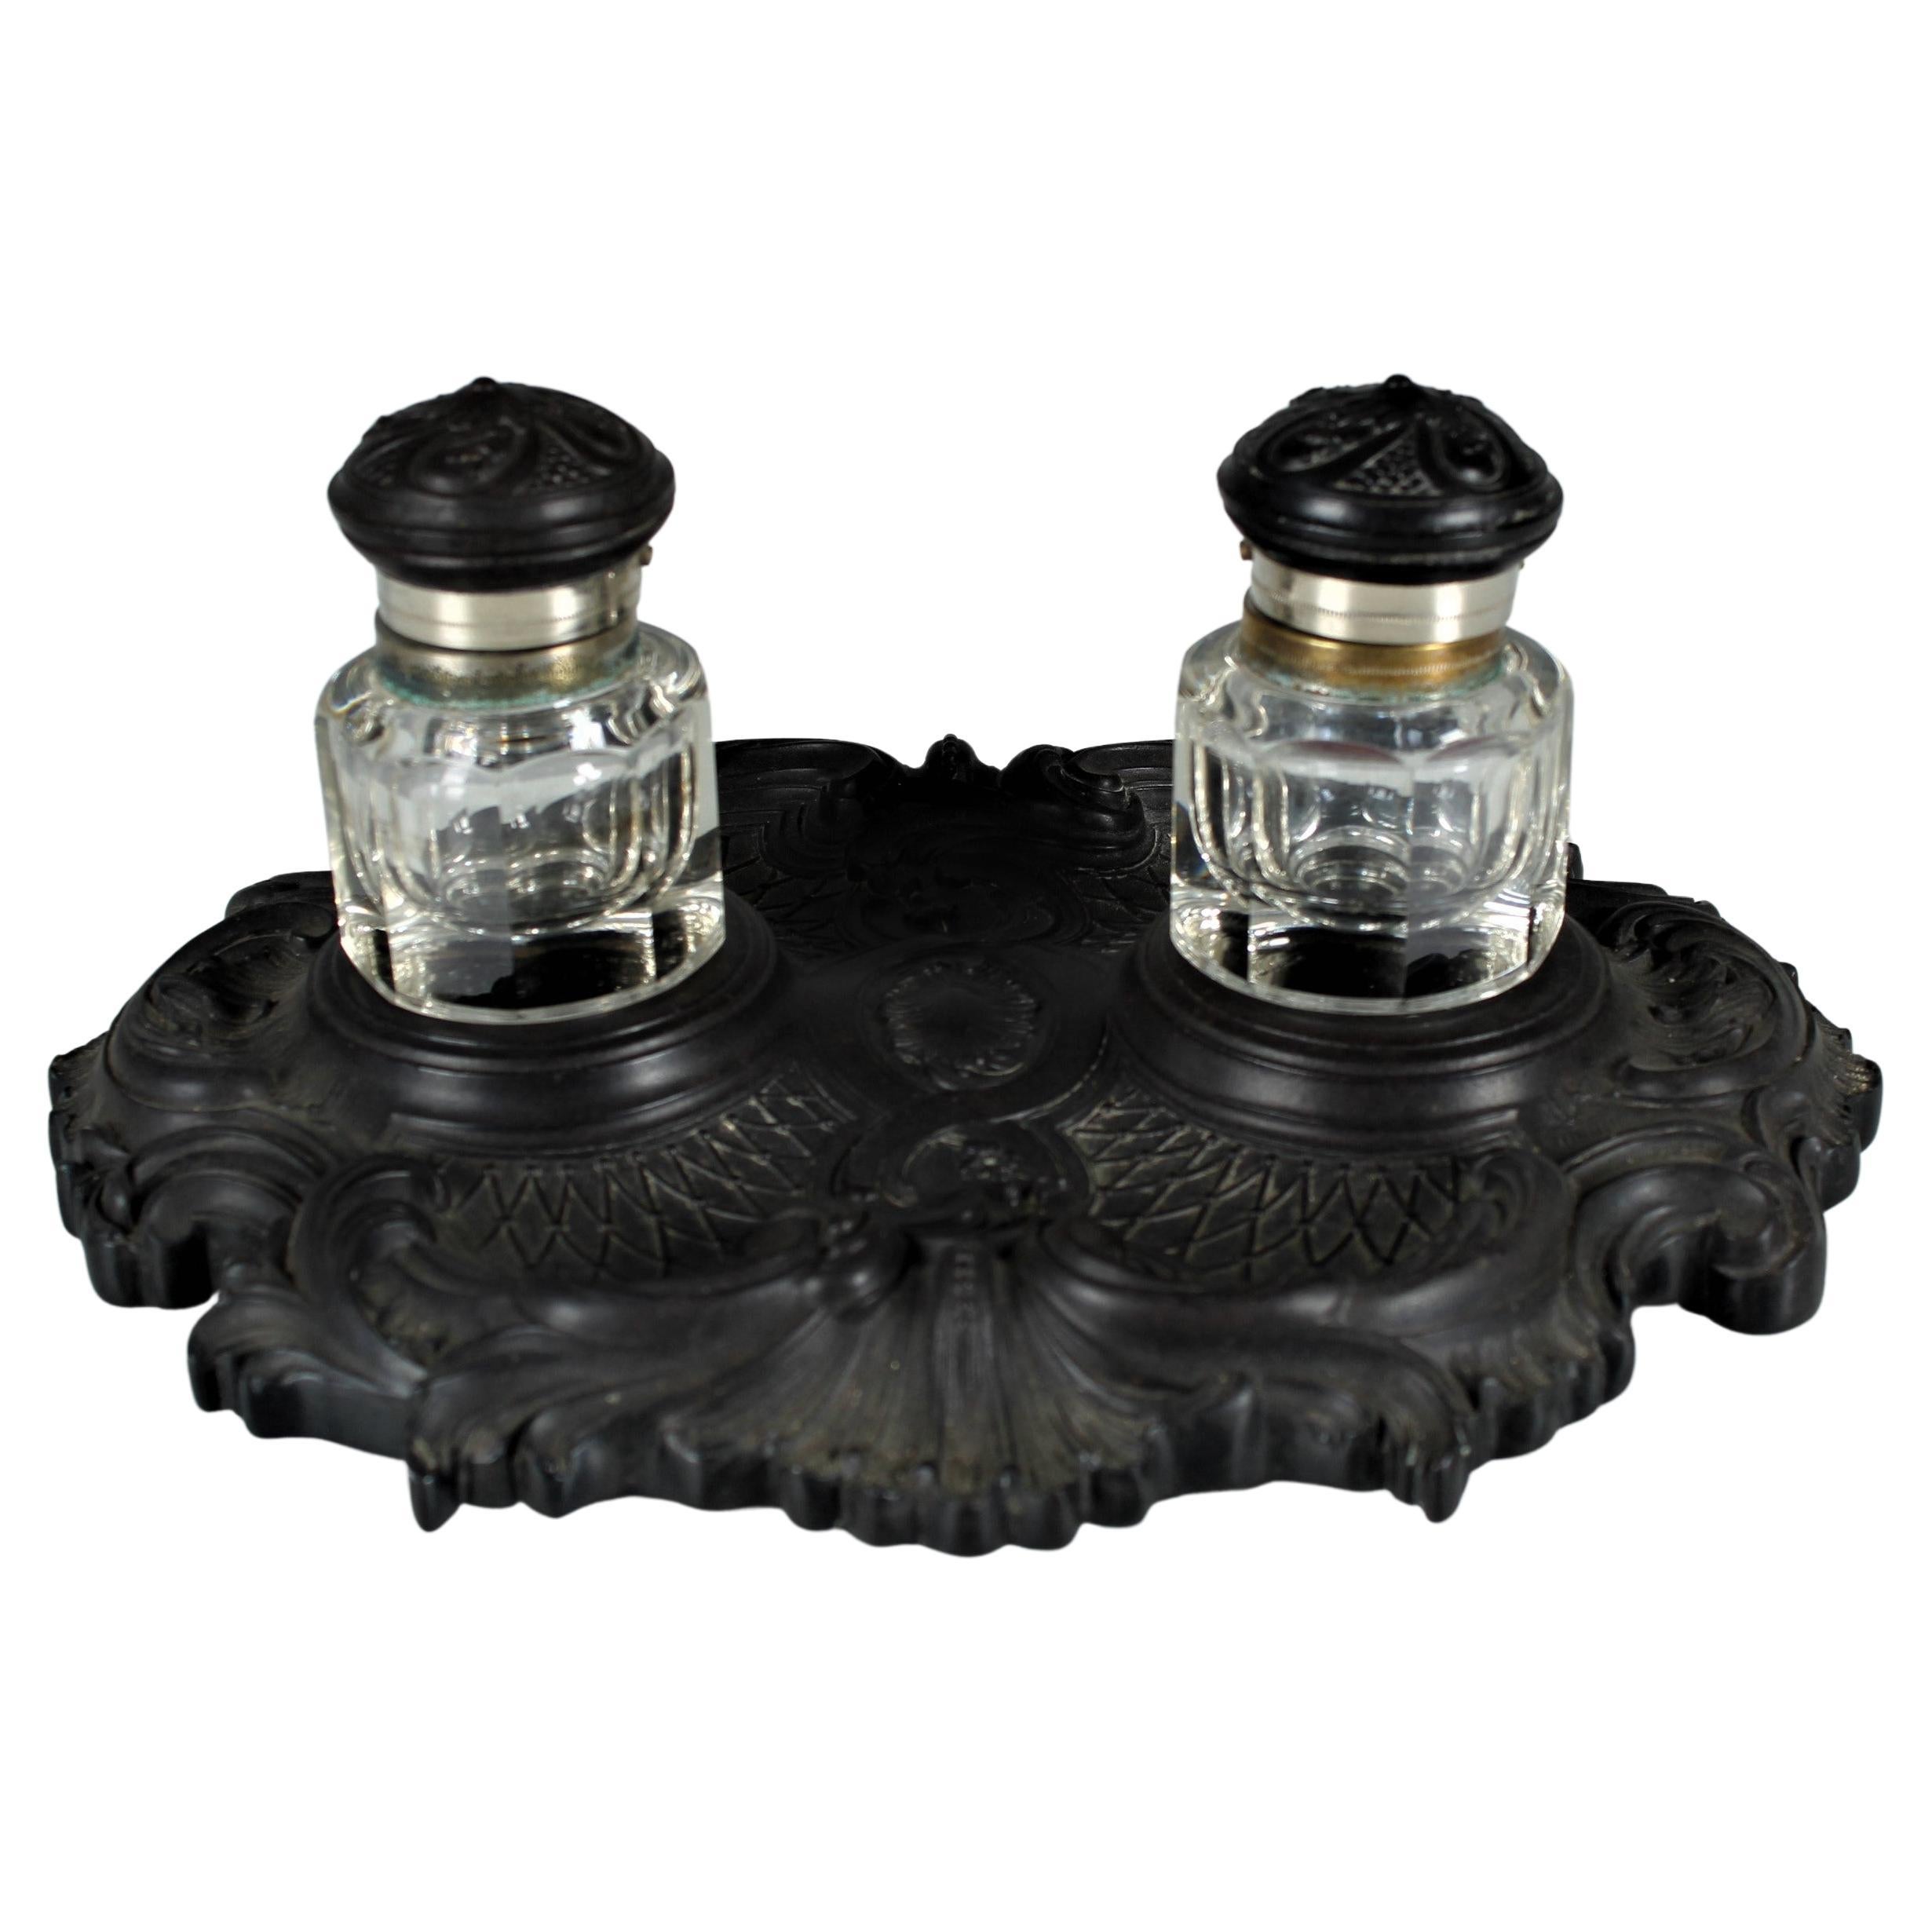 Antique Double Inkstand With Glass Inserts, Gutta-Percha, France, Circa 1880 For Sale